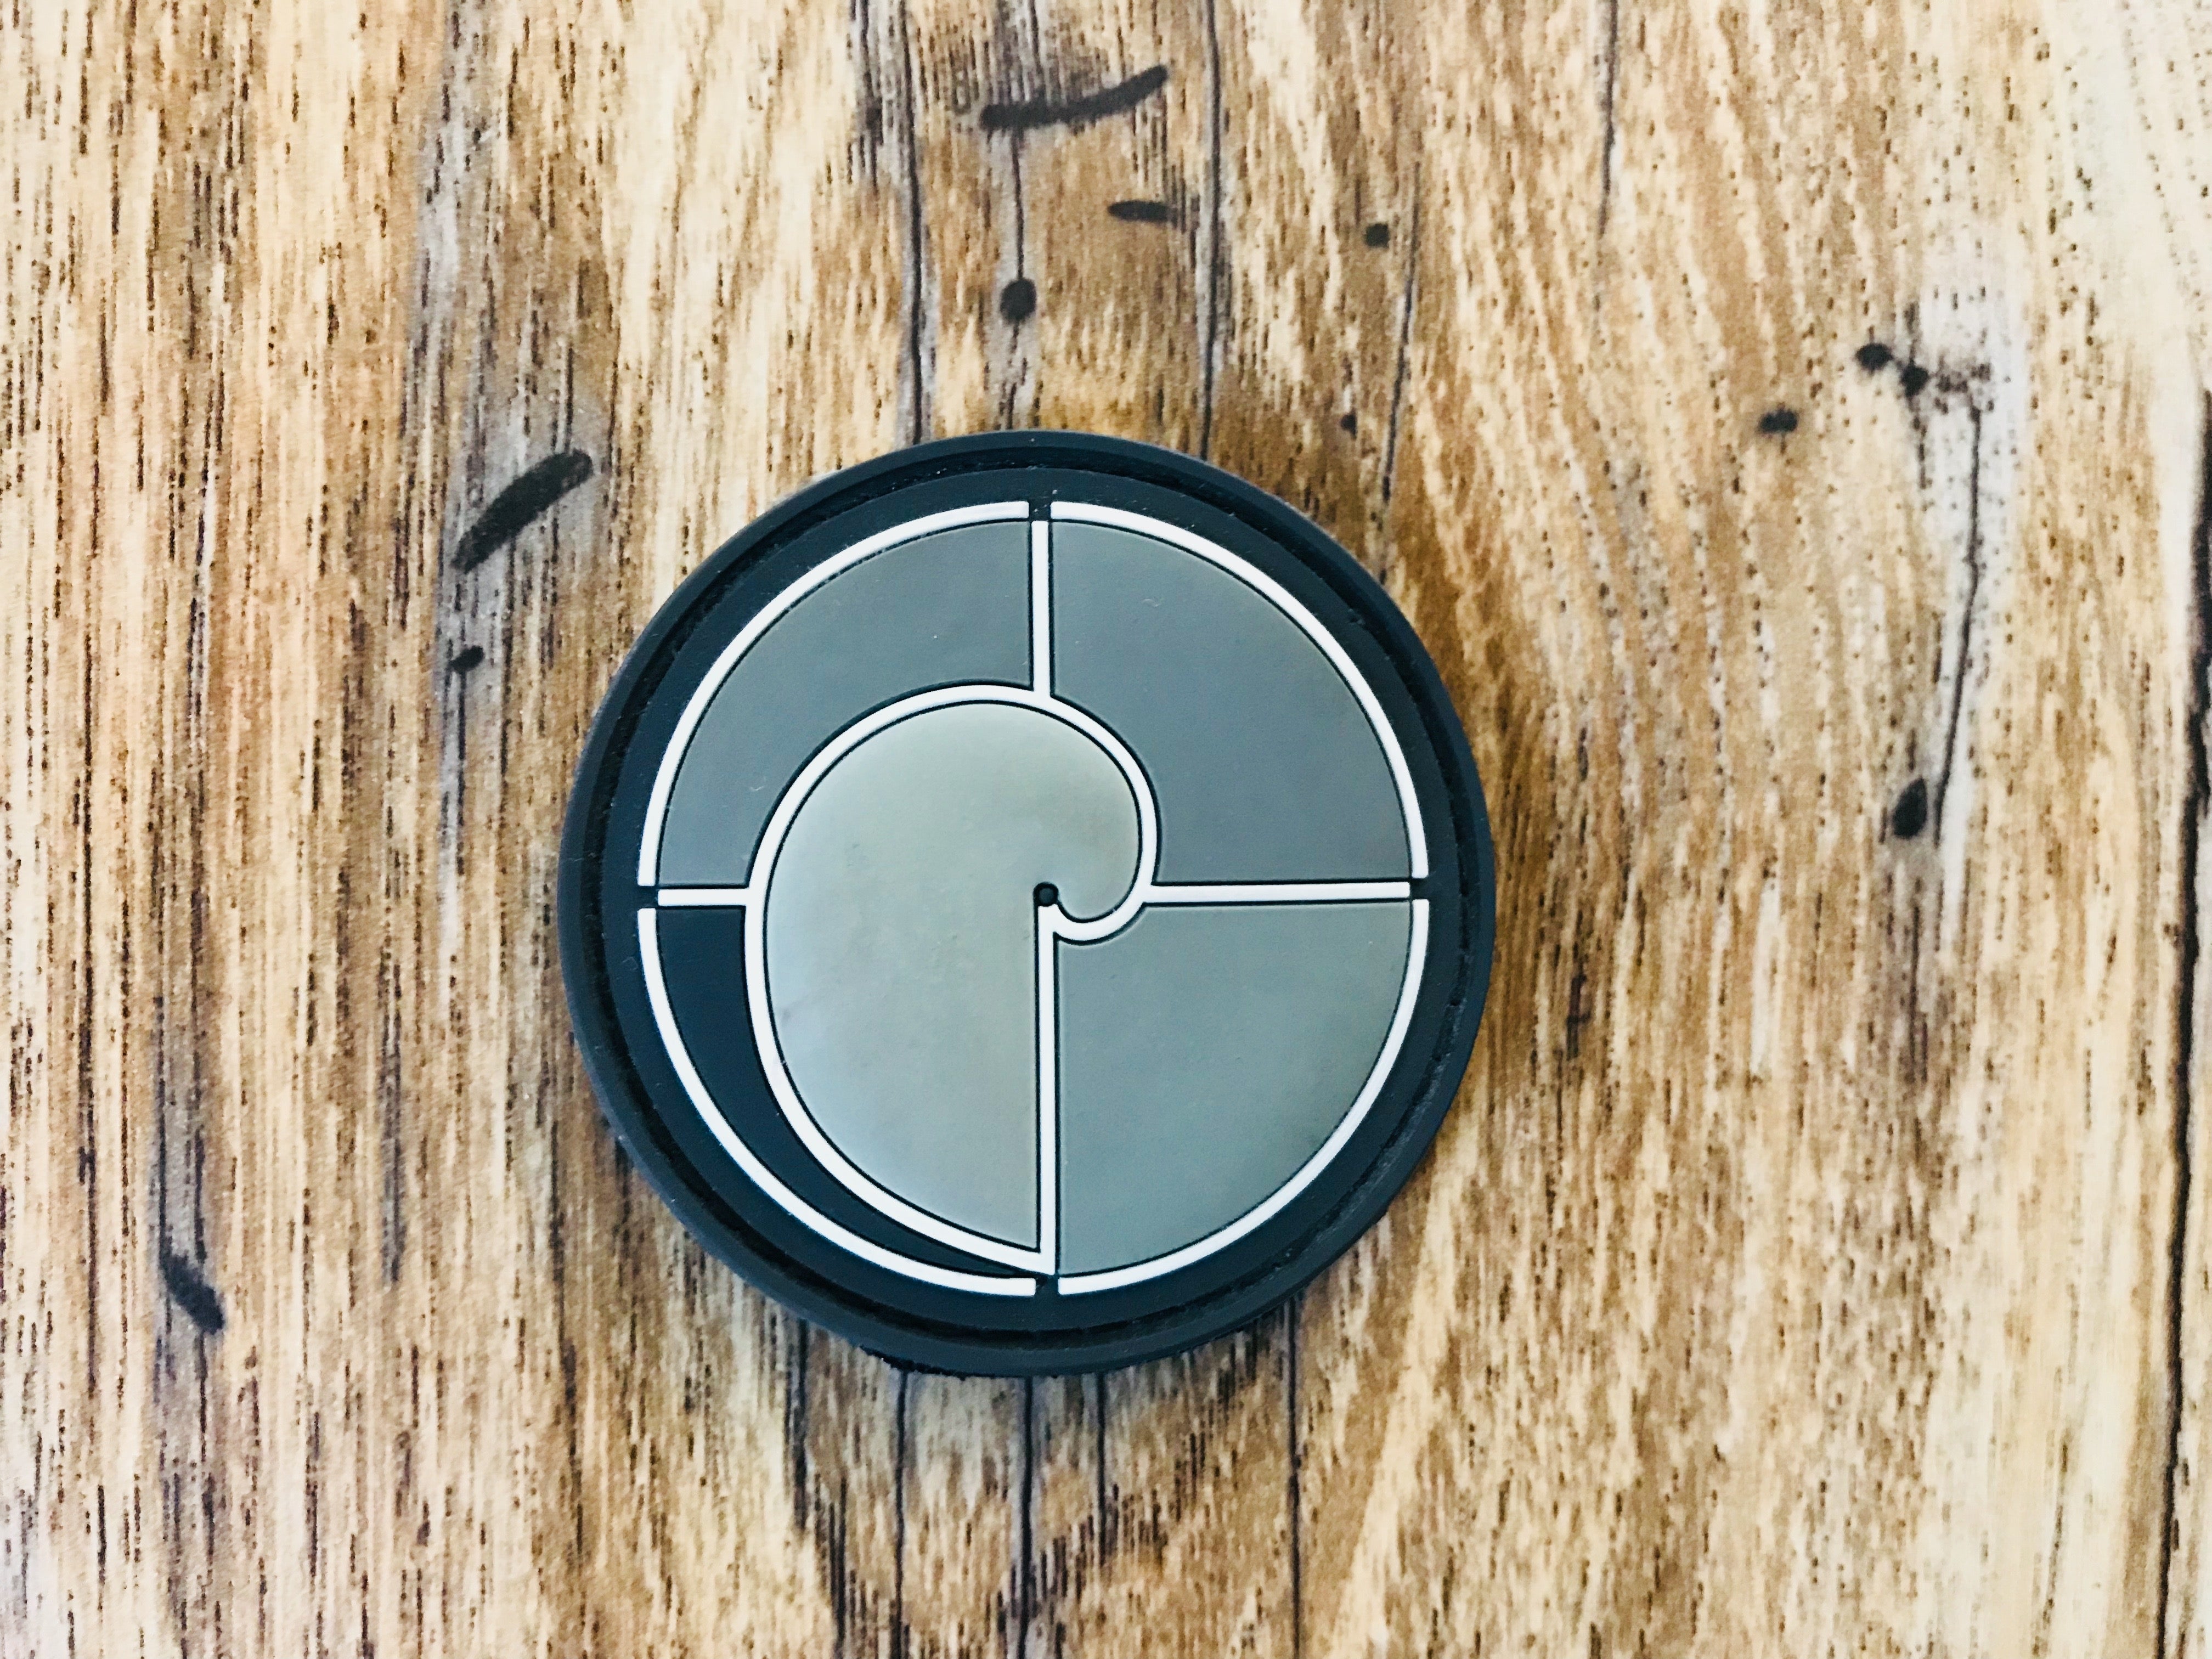 Rubber logo morale patch backed in Velcro 